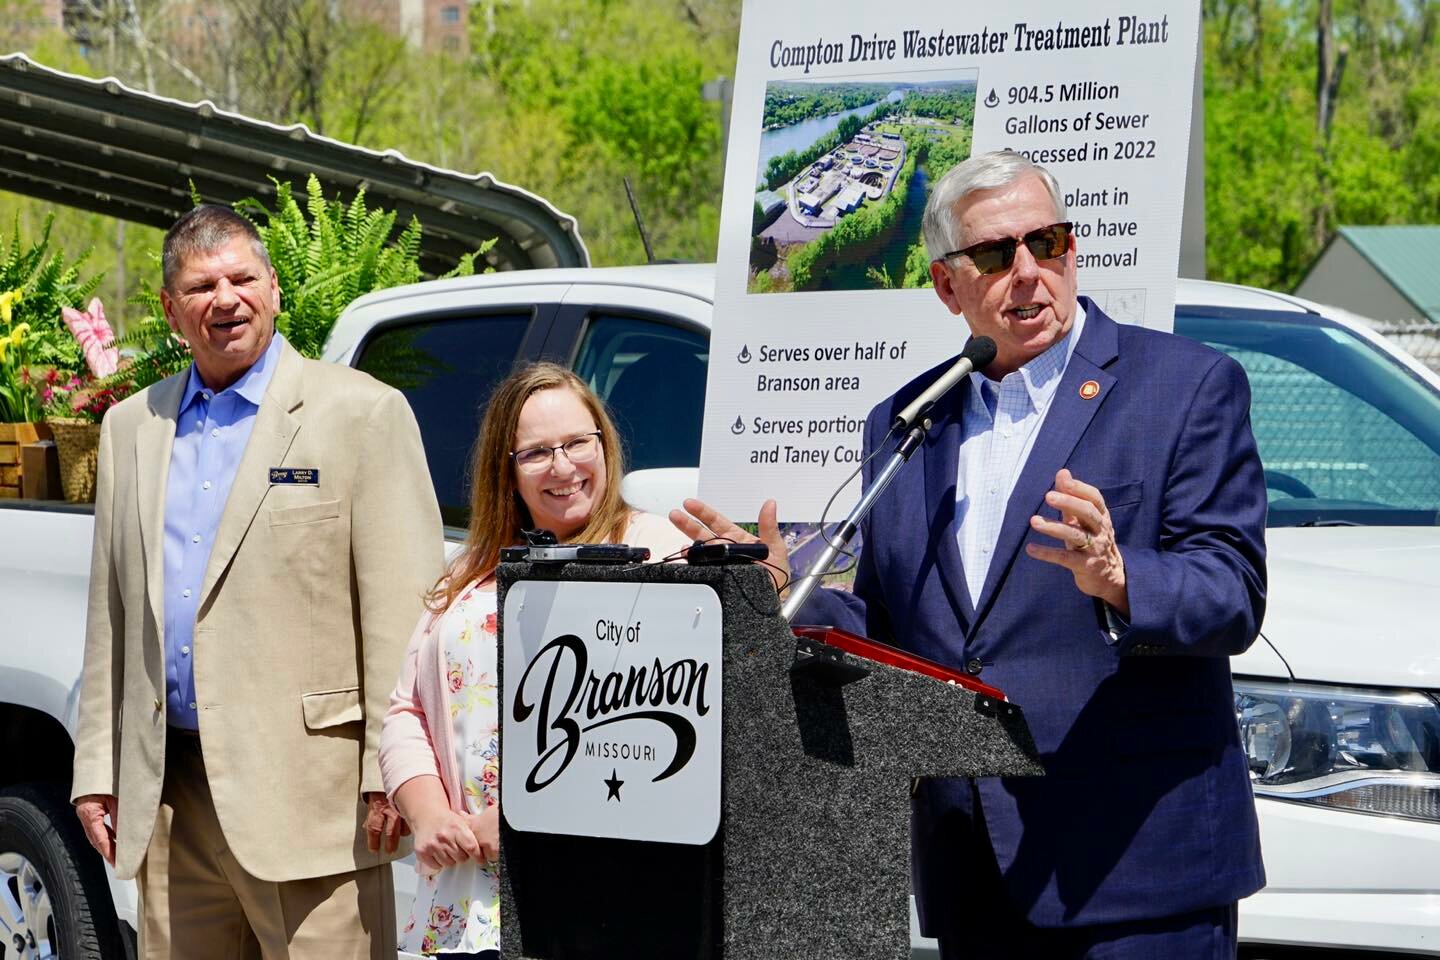 Gov. Mike Parson, from right, Missouri Department of Economic Development Acting Director Maggie Kost and Branson Mayor Larry Milton participate in a ceremony at the treatment plant on April 14.